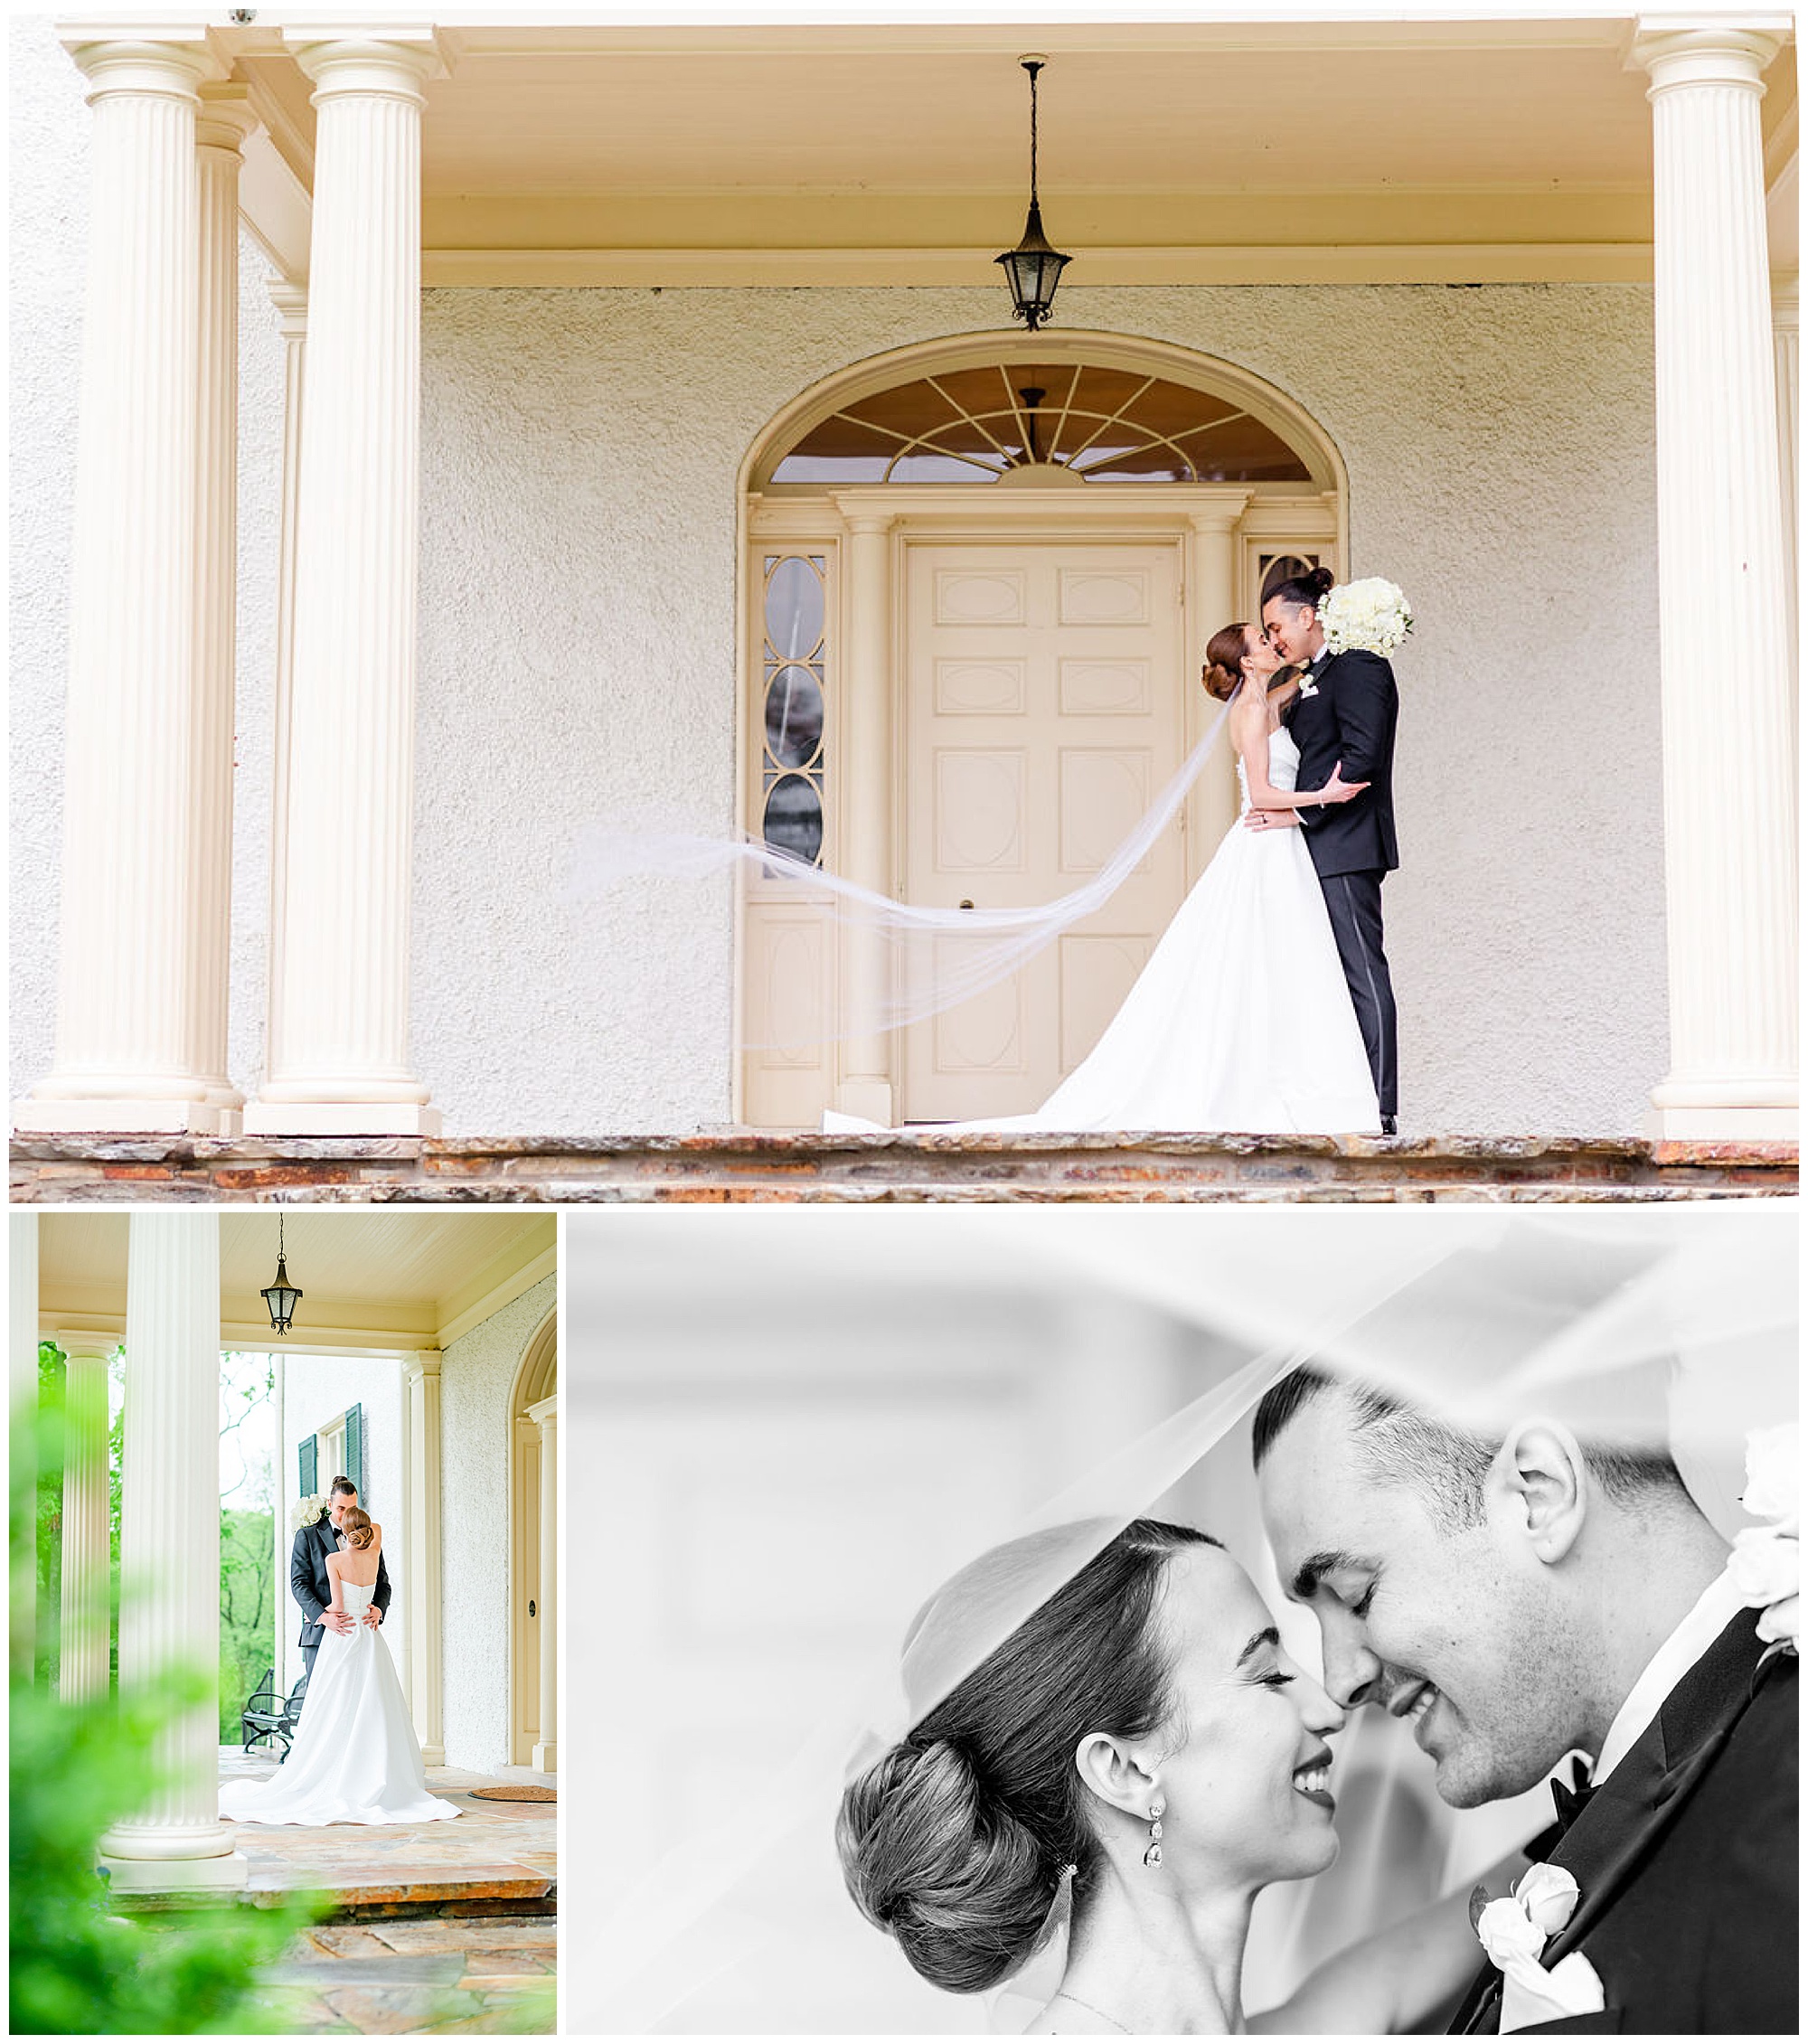 why to have privacy for portraits, romantic portraits, wedding photography tips, wedding photography ideas, high end wedding photography tips, D.C. wedding photographer, Rachel E.H. Photography, Rust Manor House wedding